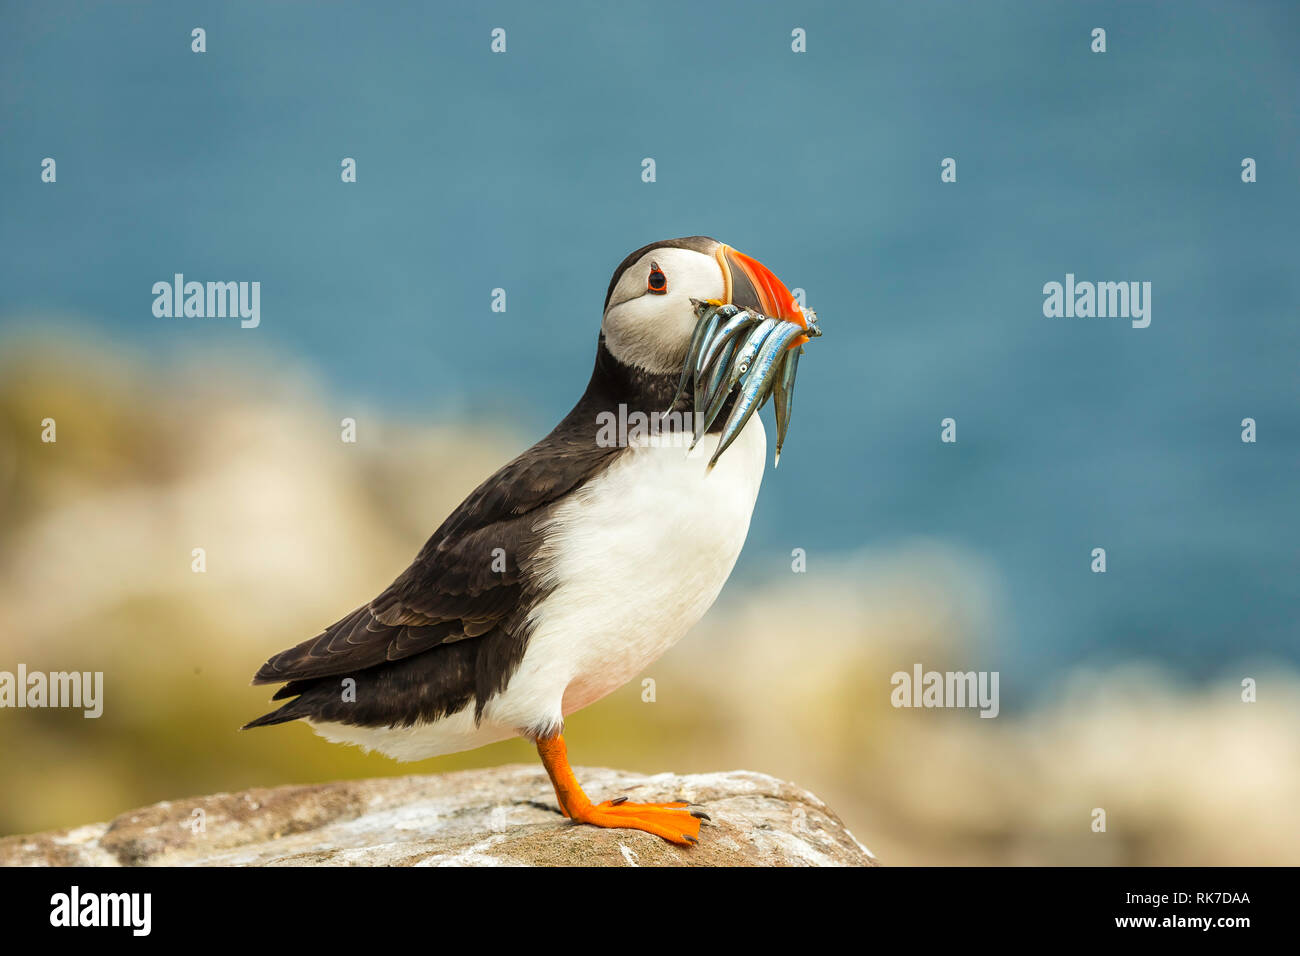 Puffin (Fratercula arctica) single, atlantic puffin with sand eels in its beak, facing right and perched on a rock. Blurred blue background. Landscape Stock Photo